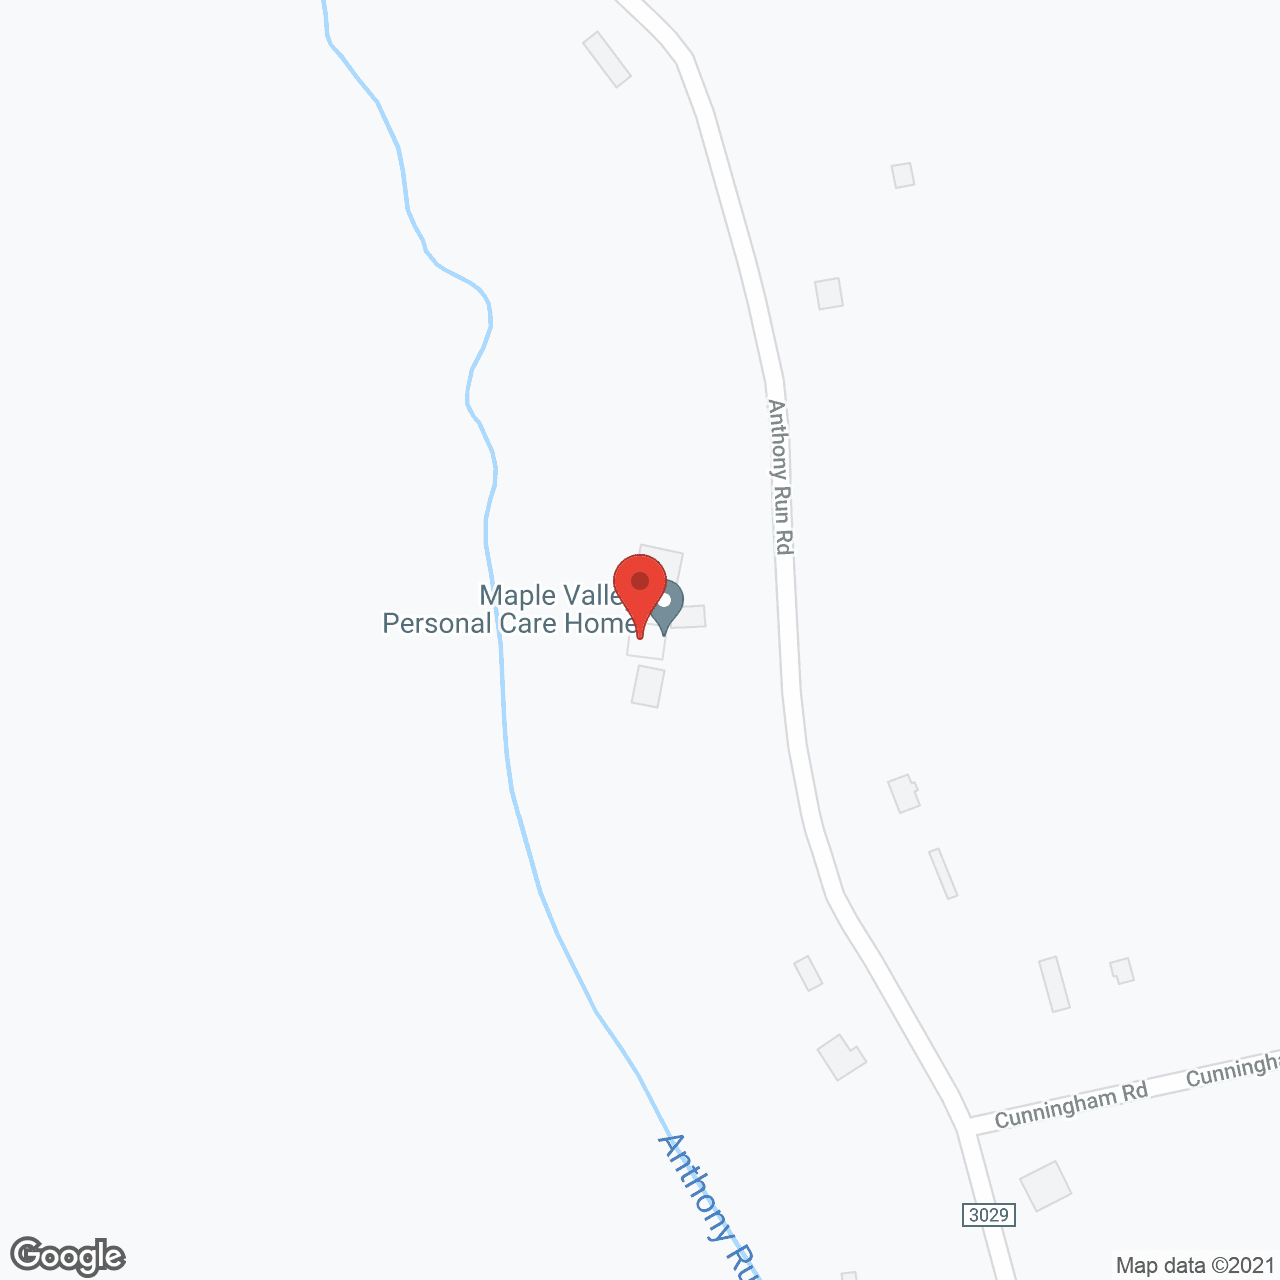 Maple Valley Personal Care Home in google map